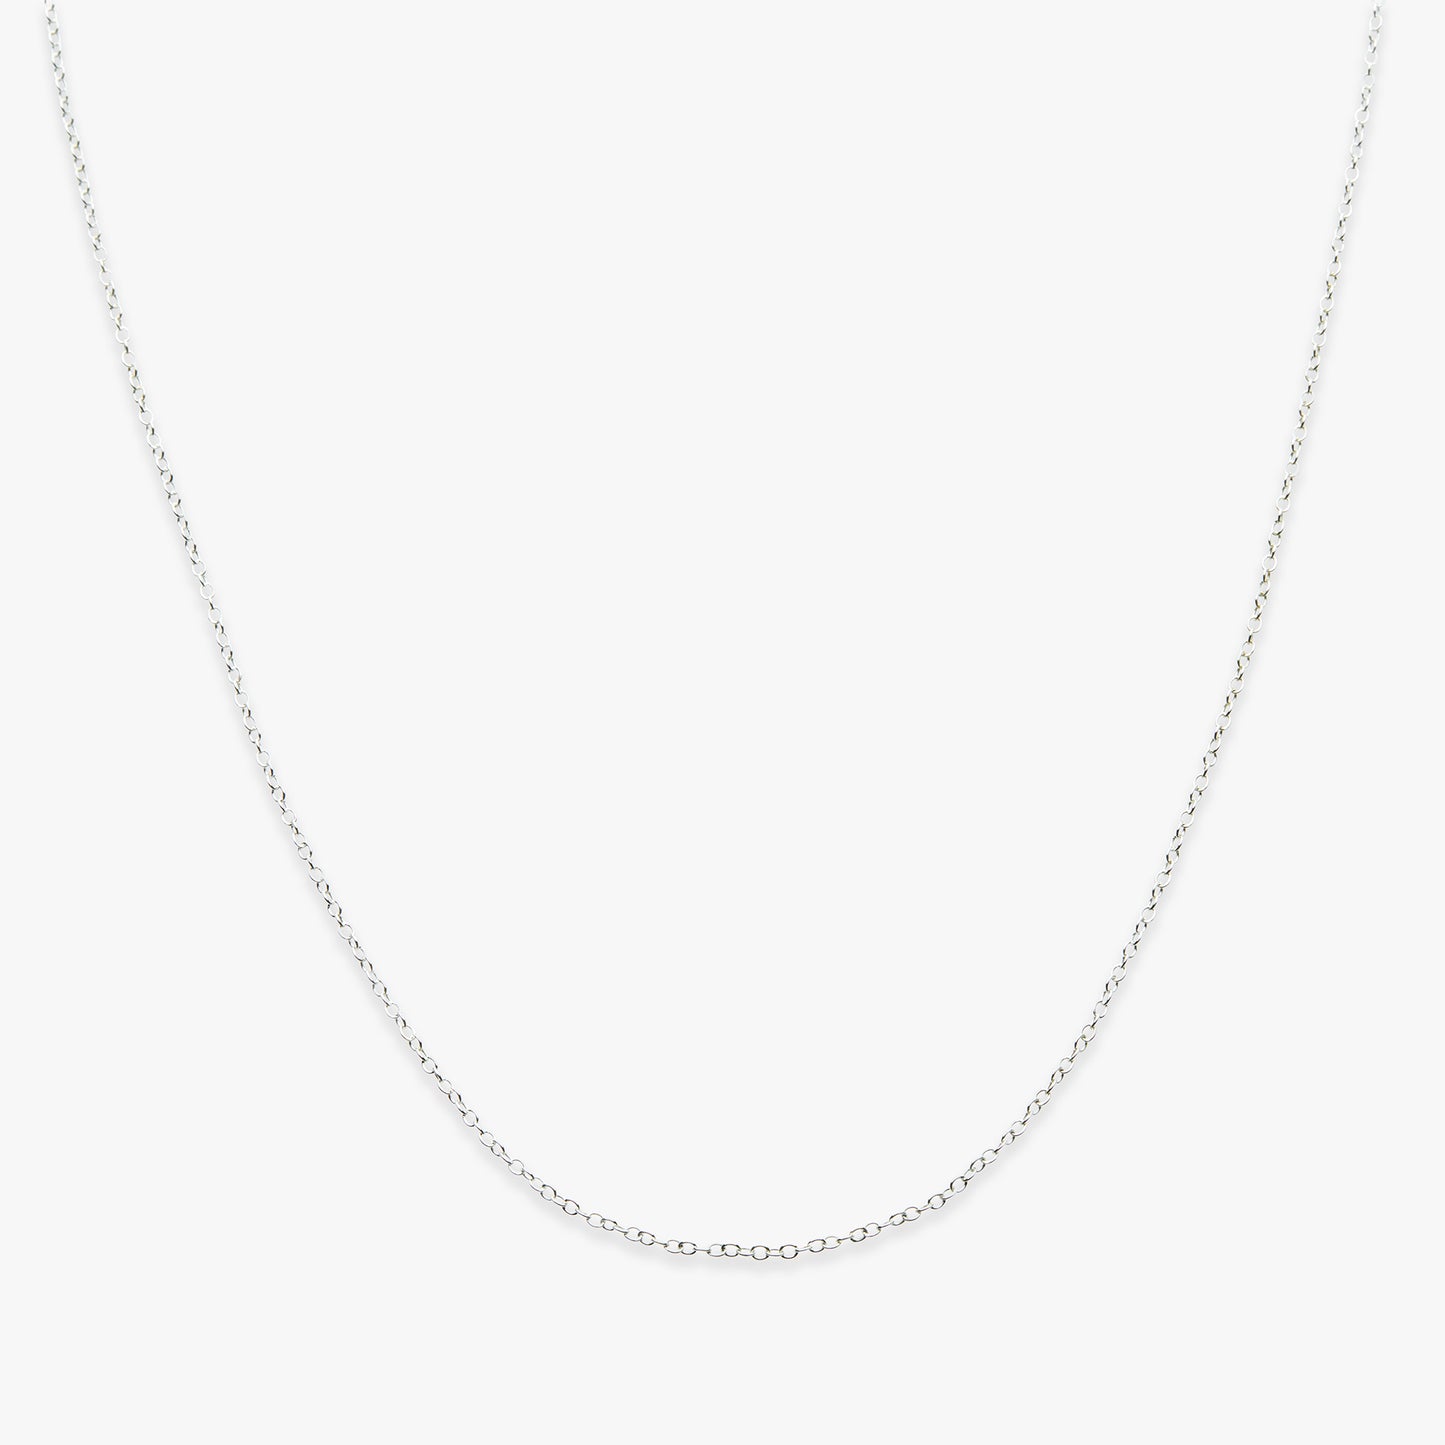 Basic oval chain ketting zilver